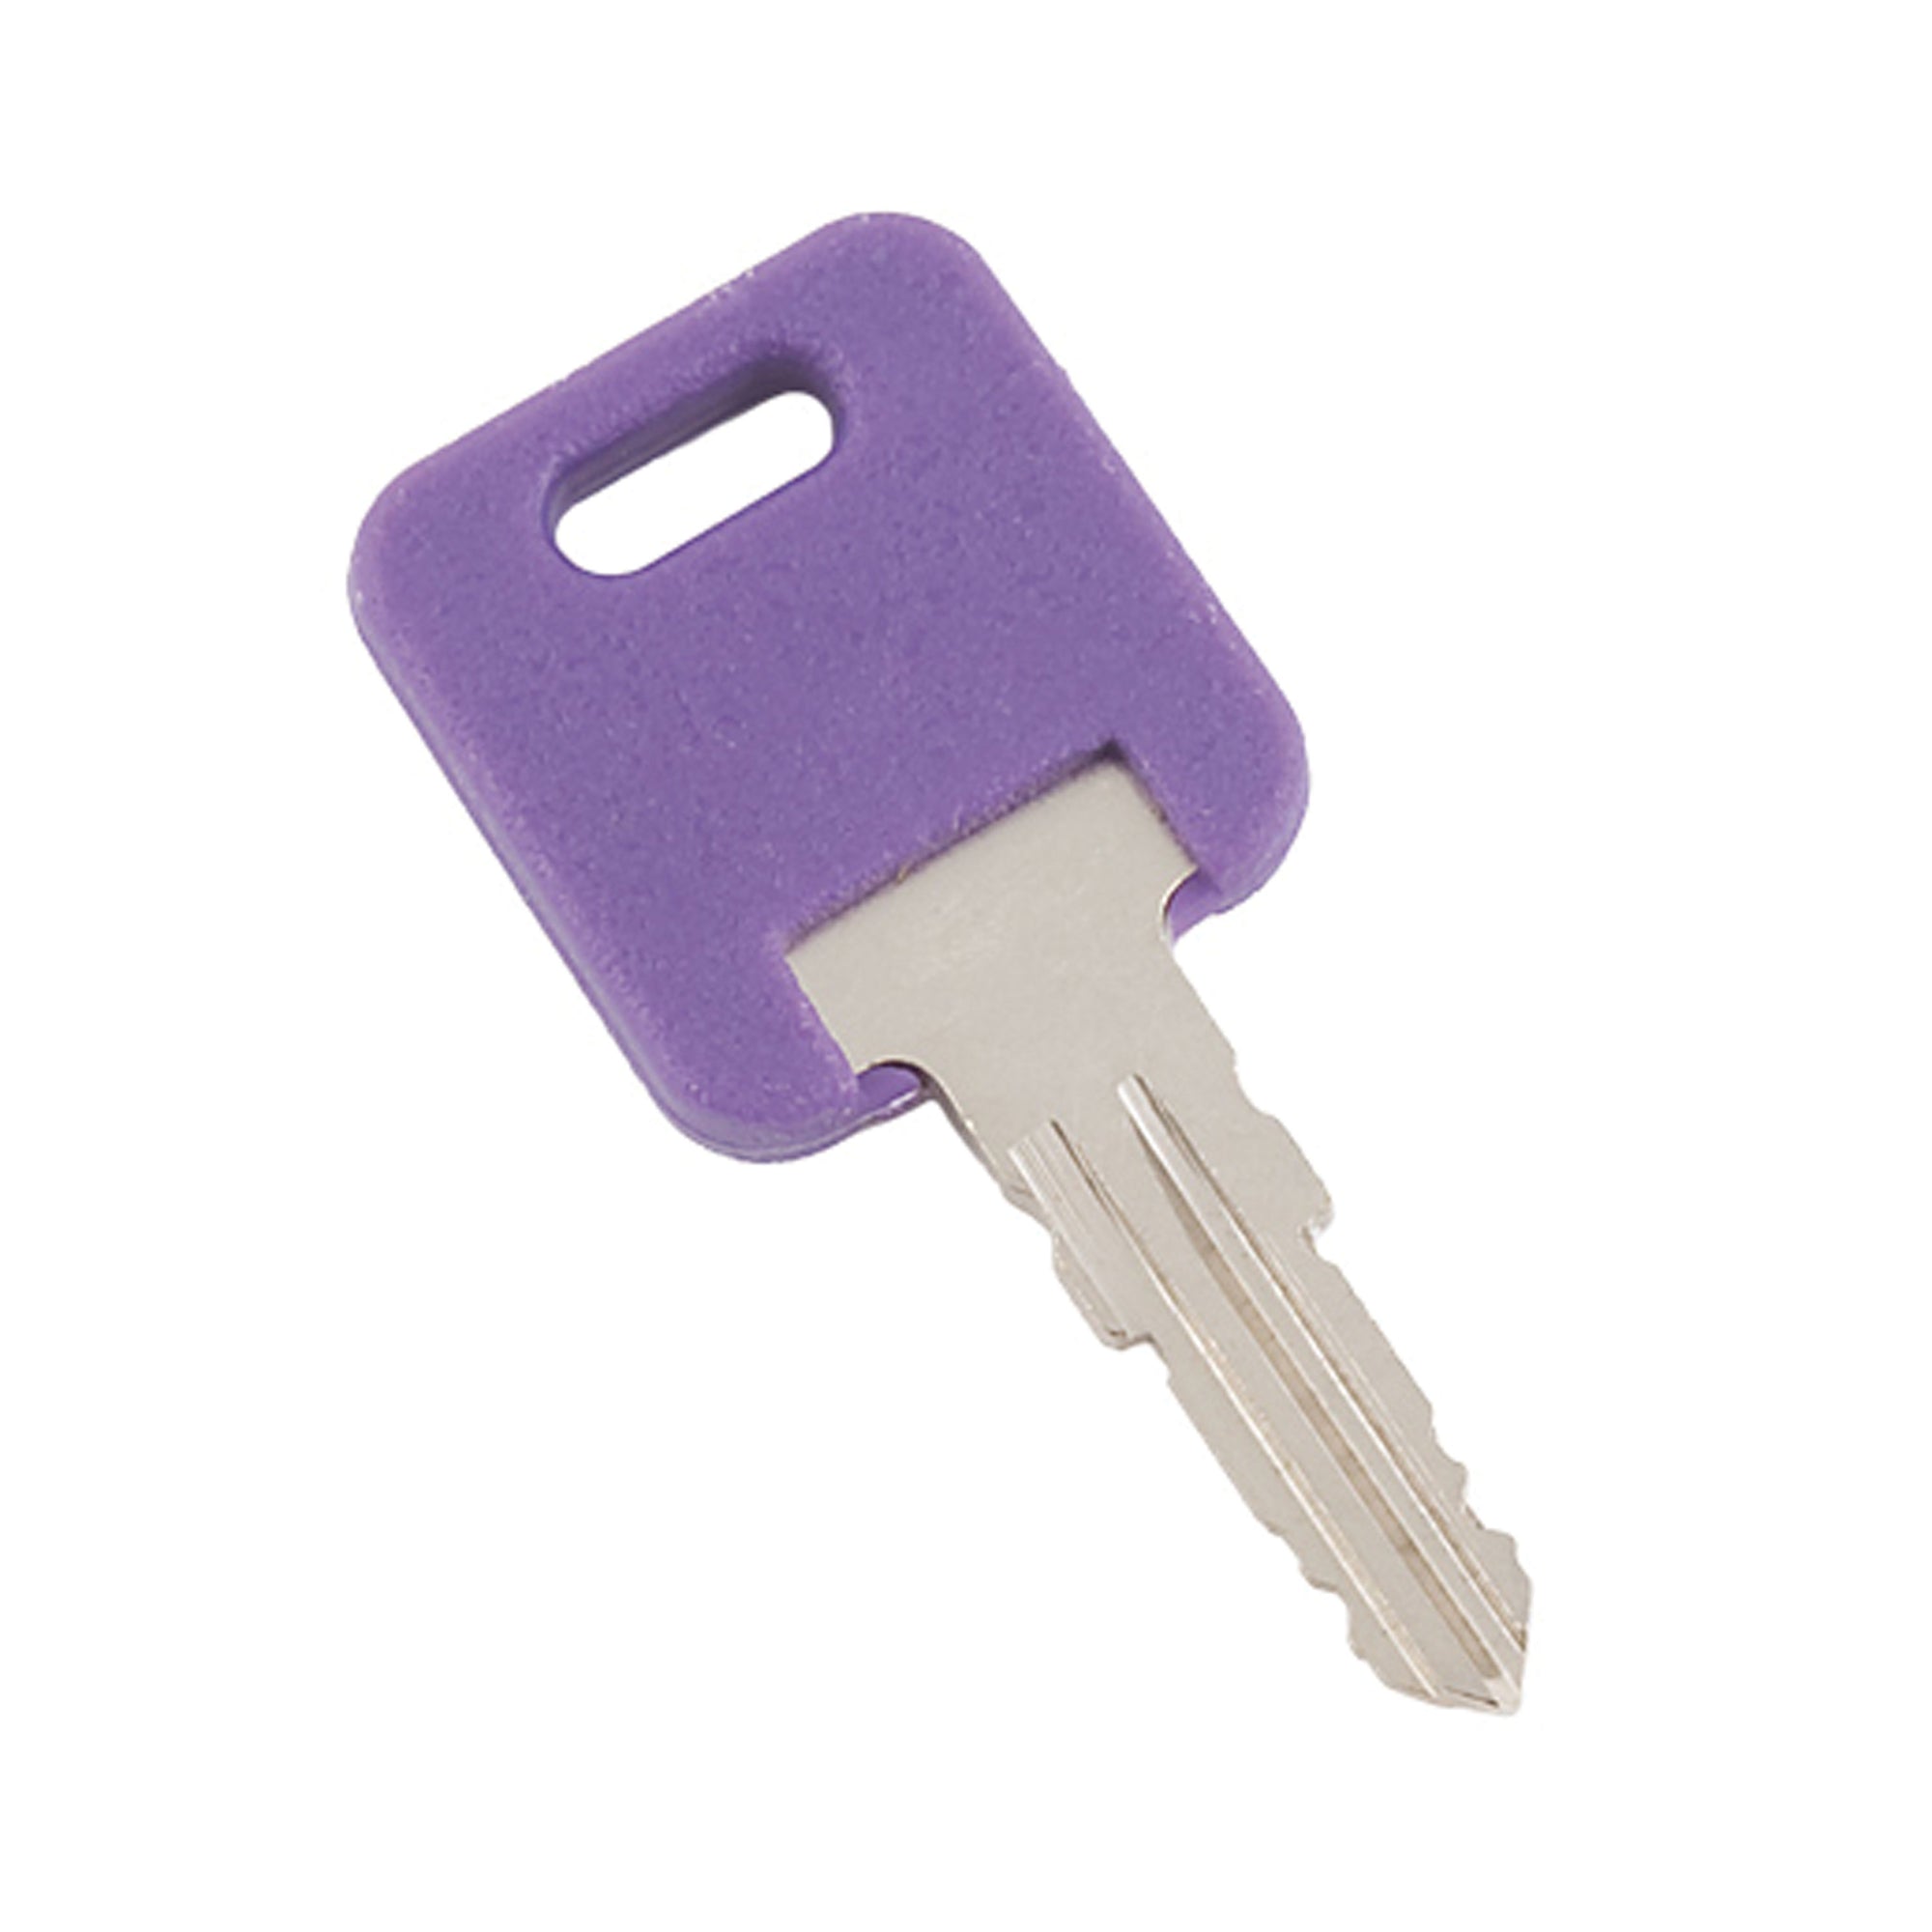 Creative Products Group G-341 Global Link G-Series Replacement Key - #341, Each